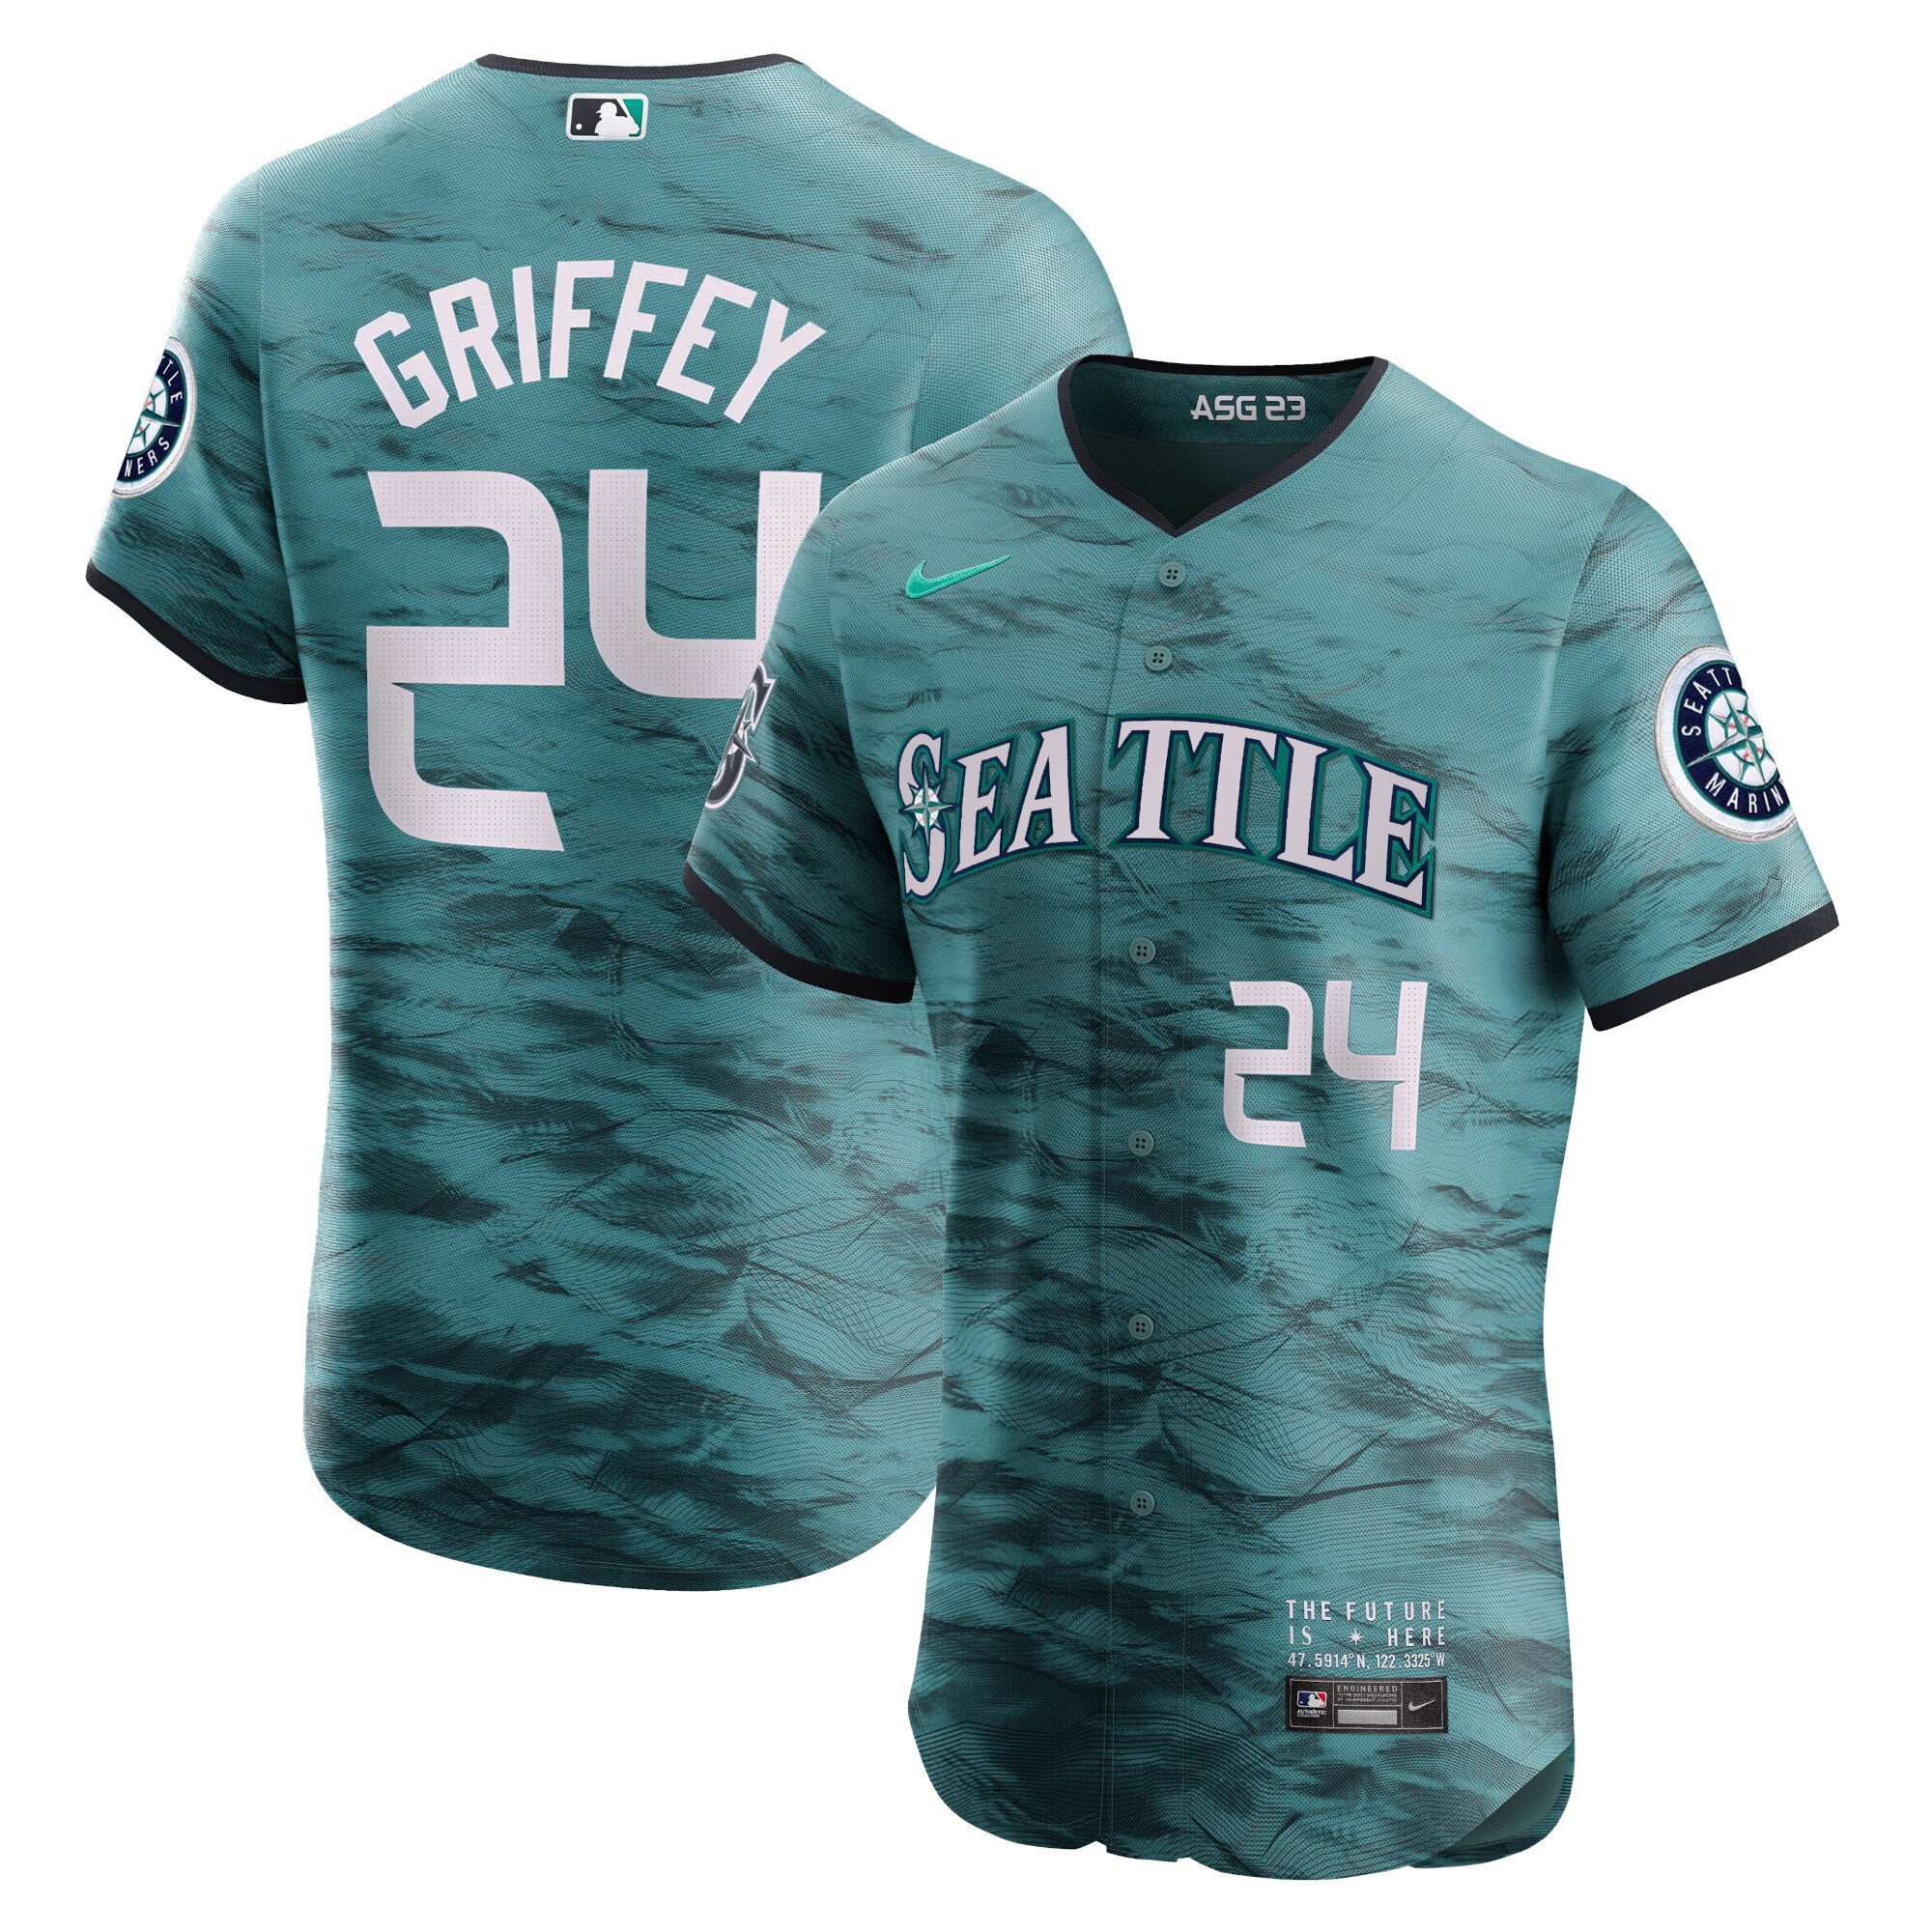 Mariners Griffey 24 Authentic Teal Jersey